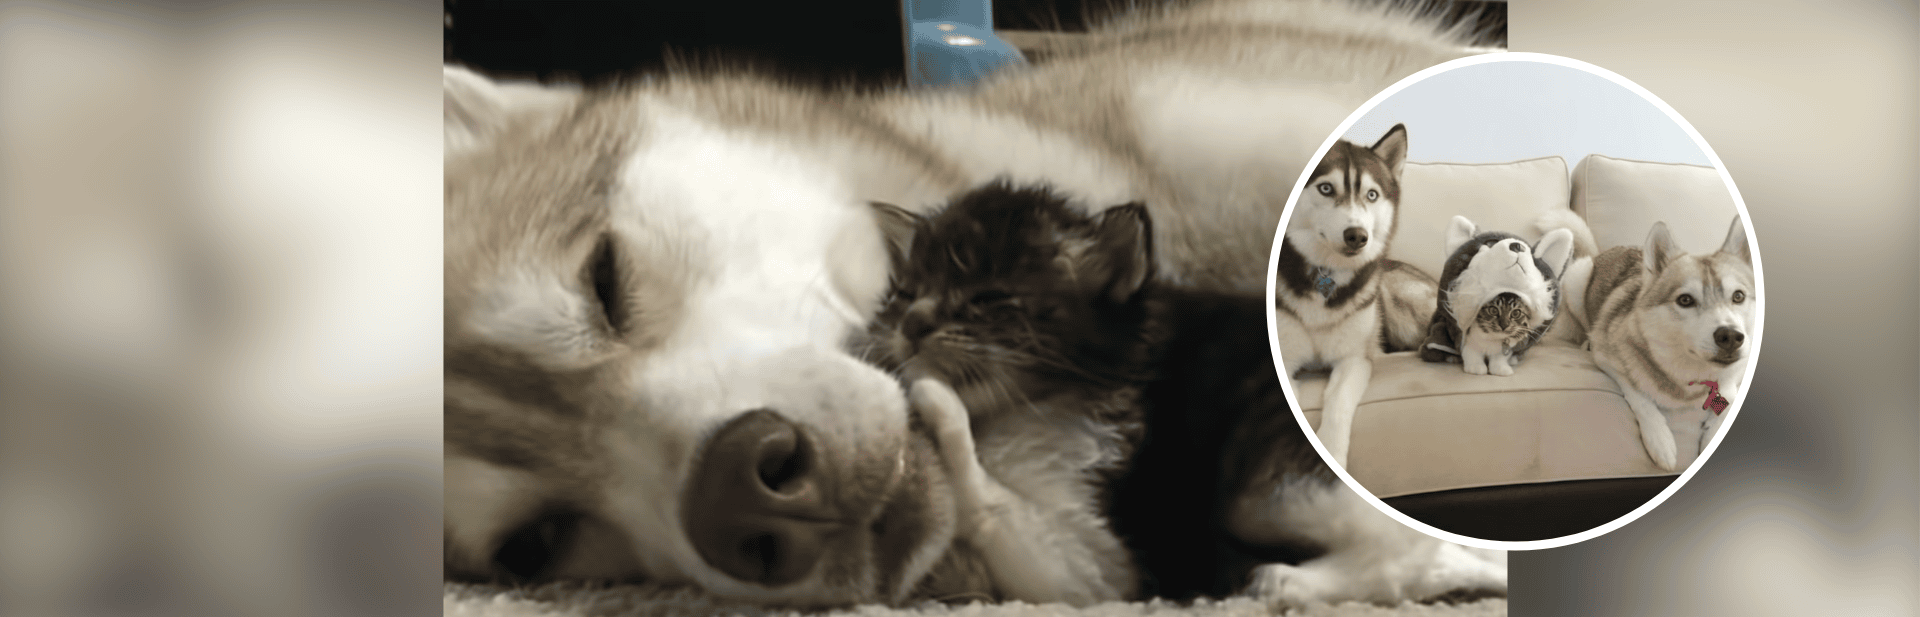 Tiny Kitten Thinks She’s a Dog After Being Raised By The Most Unlikely Guardians